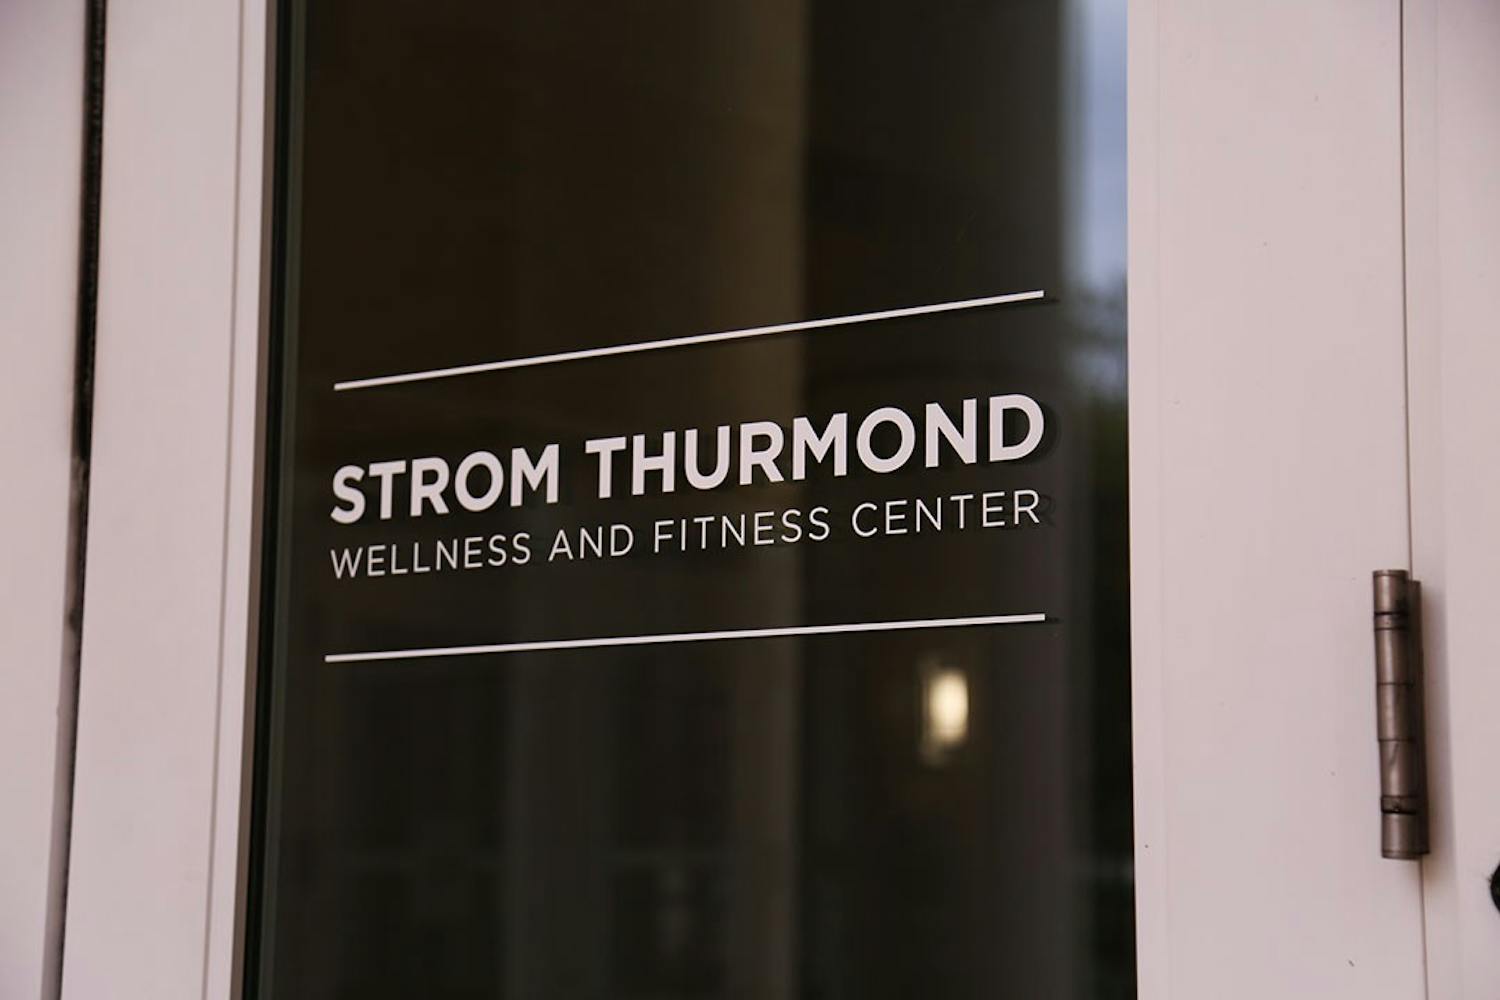 A door marks the entrance to the Strom Thurmond Wellness and Fitness Center.